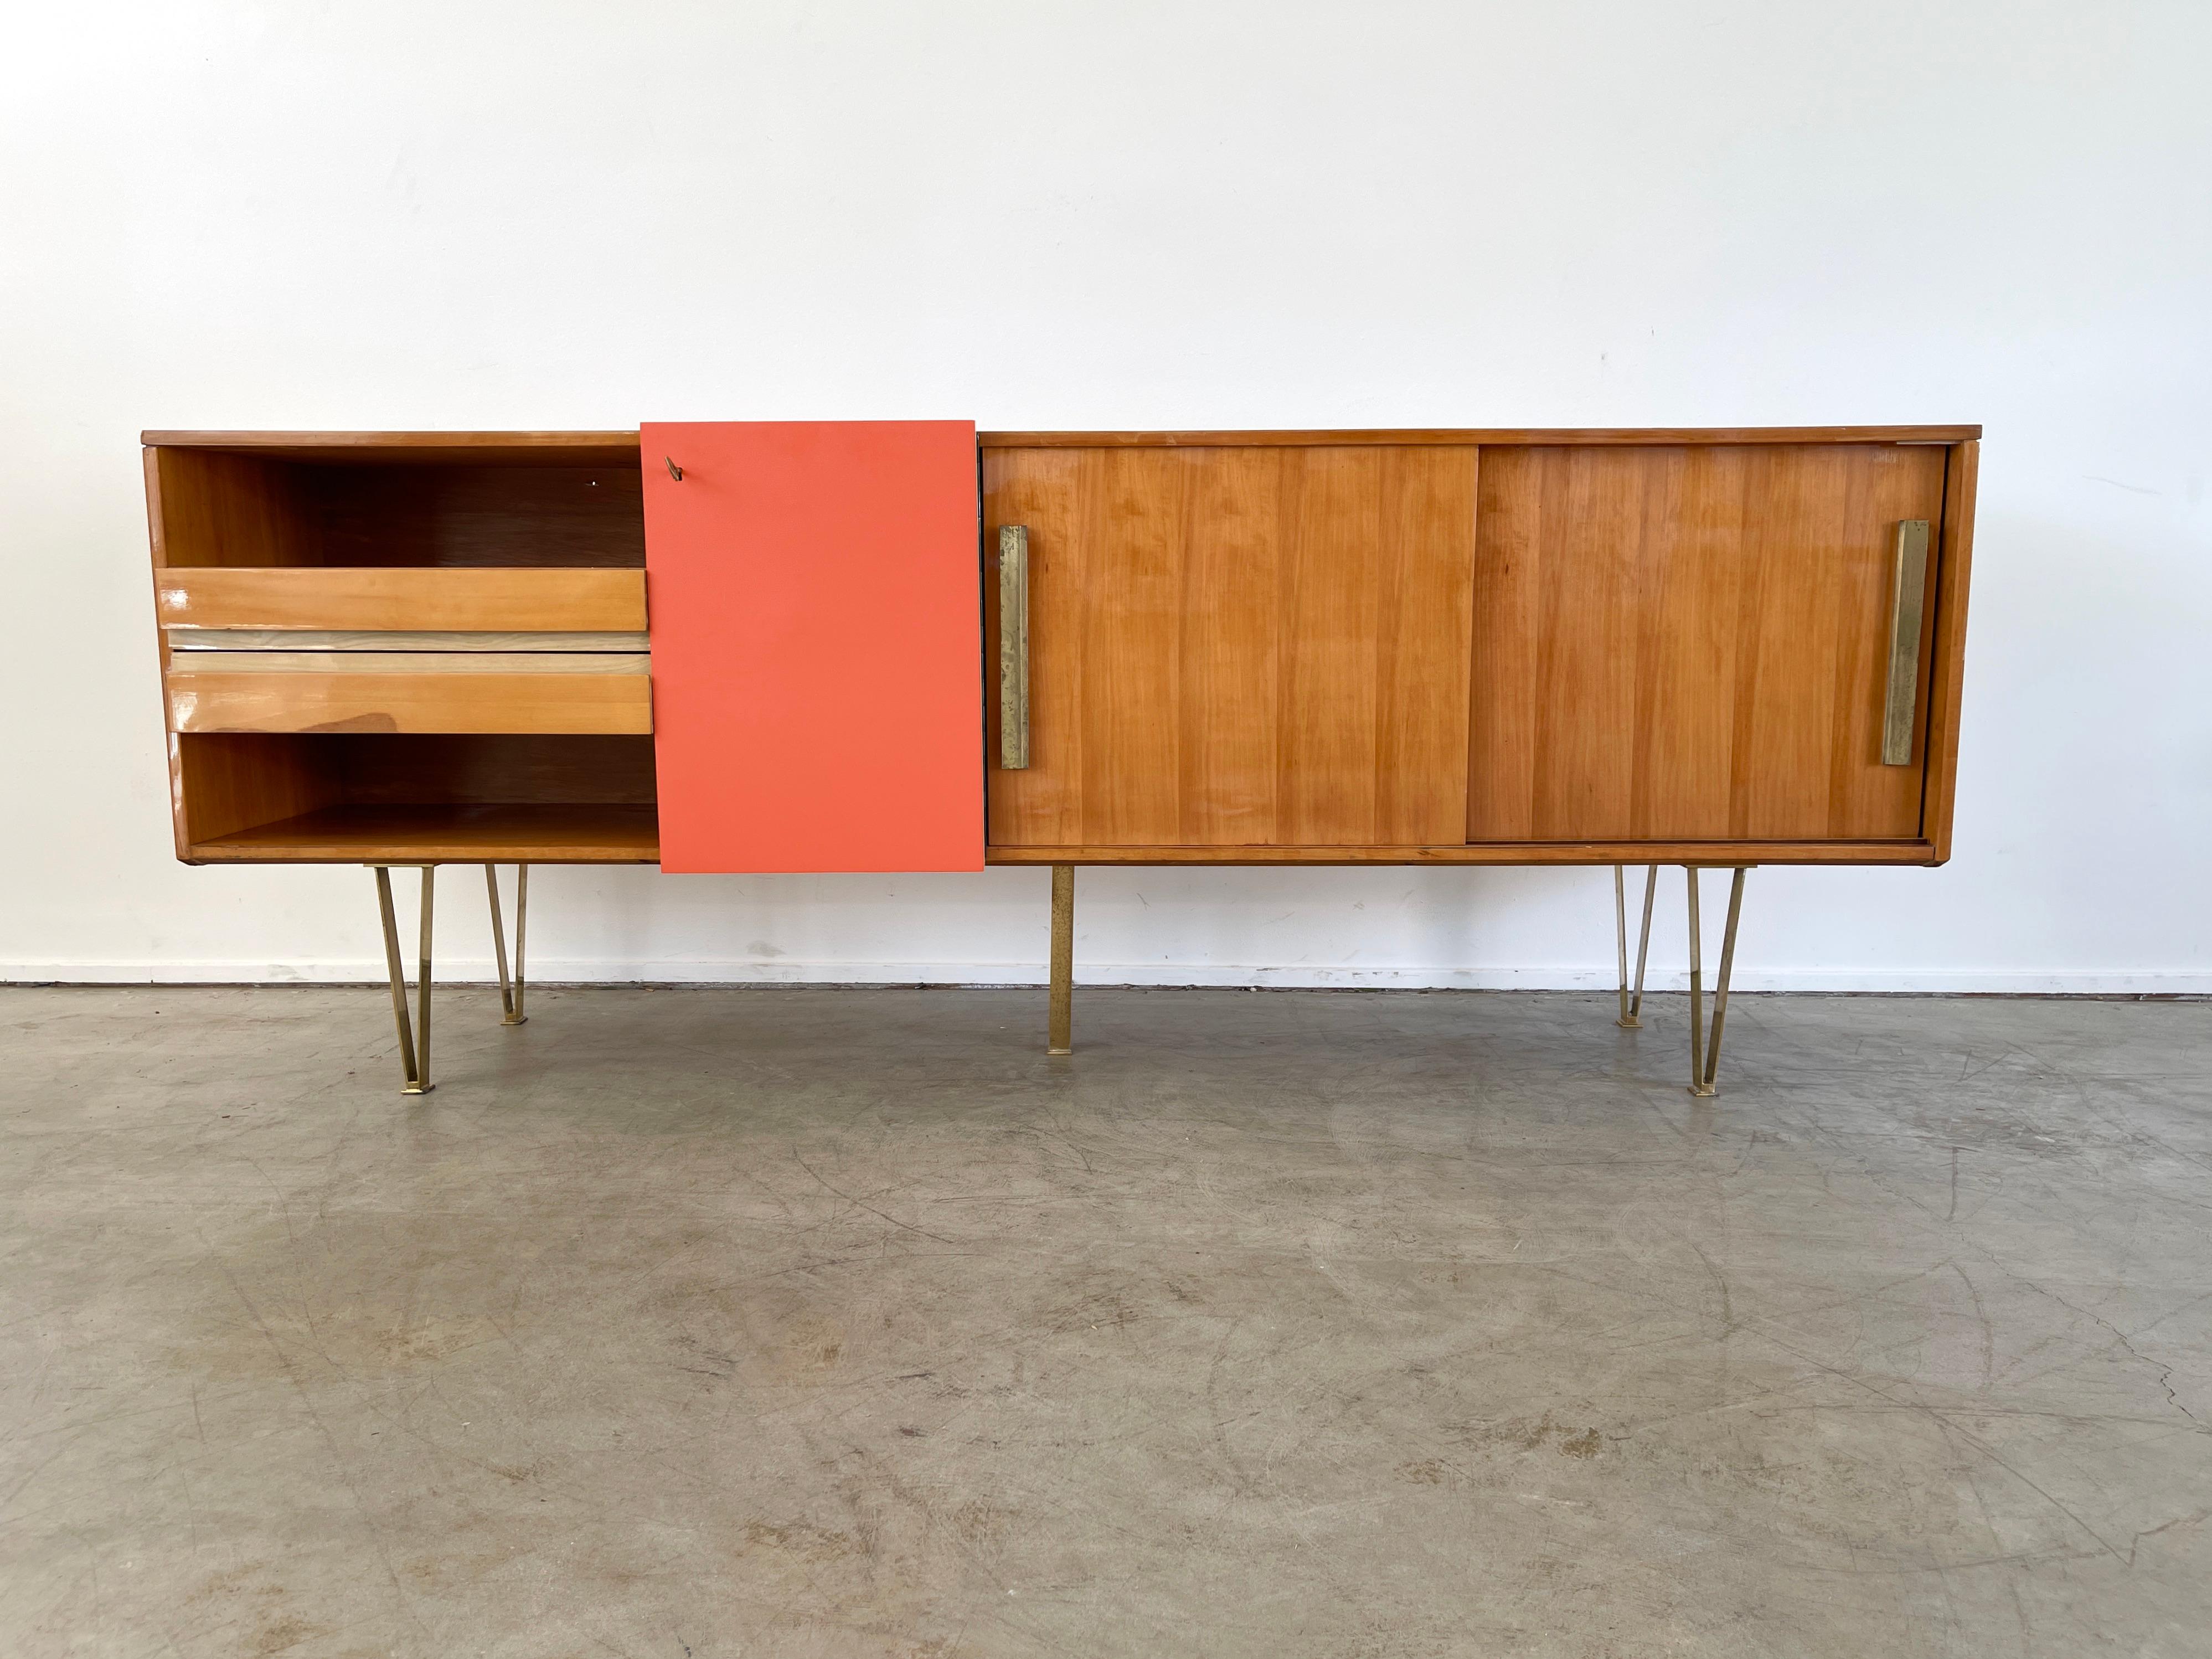 Italian sideboard circa 1960's
Walnut case with red formica door, drawers, and sliding doors 
Brass hairpin legs 
Unique piece and large in scale. 
 